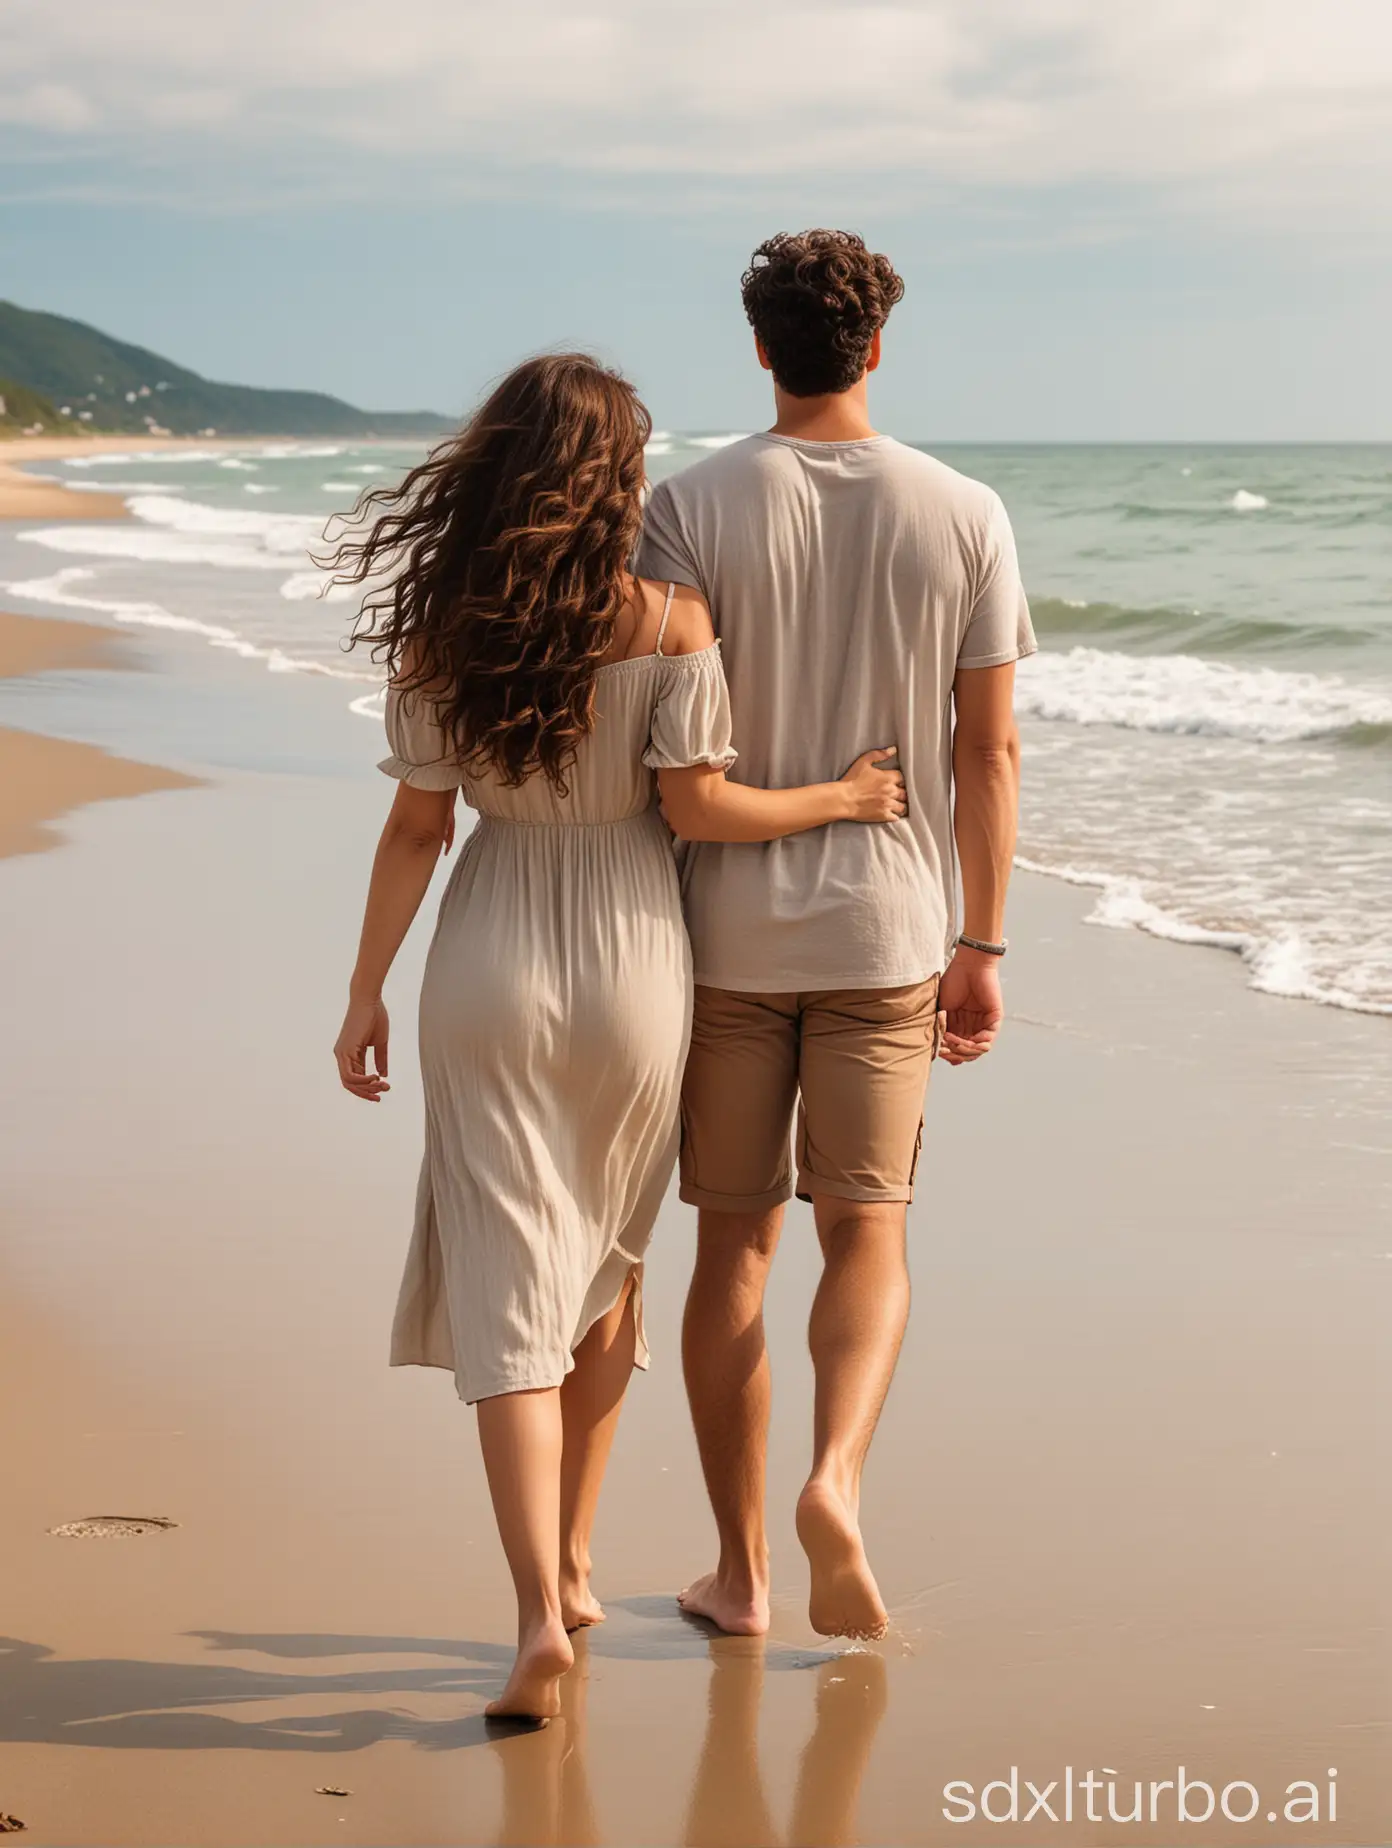 Couple-Strolling-Hand-in-Hand-on-Beach-with-Brown-and-Curly-Hair